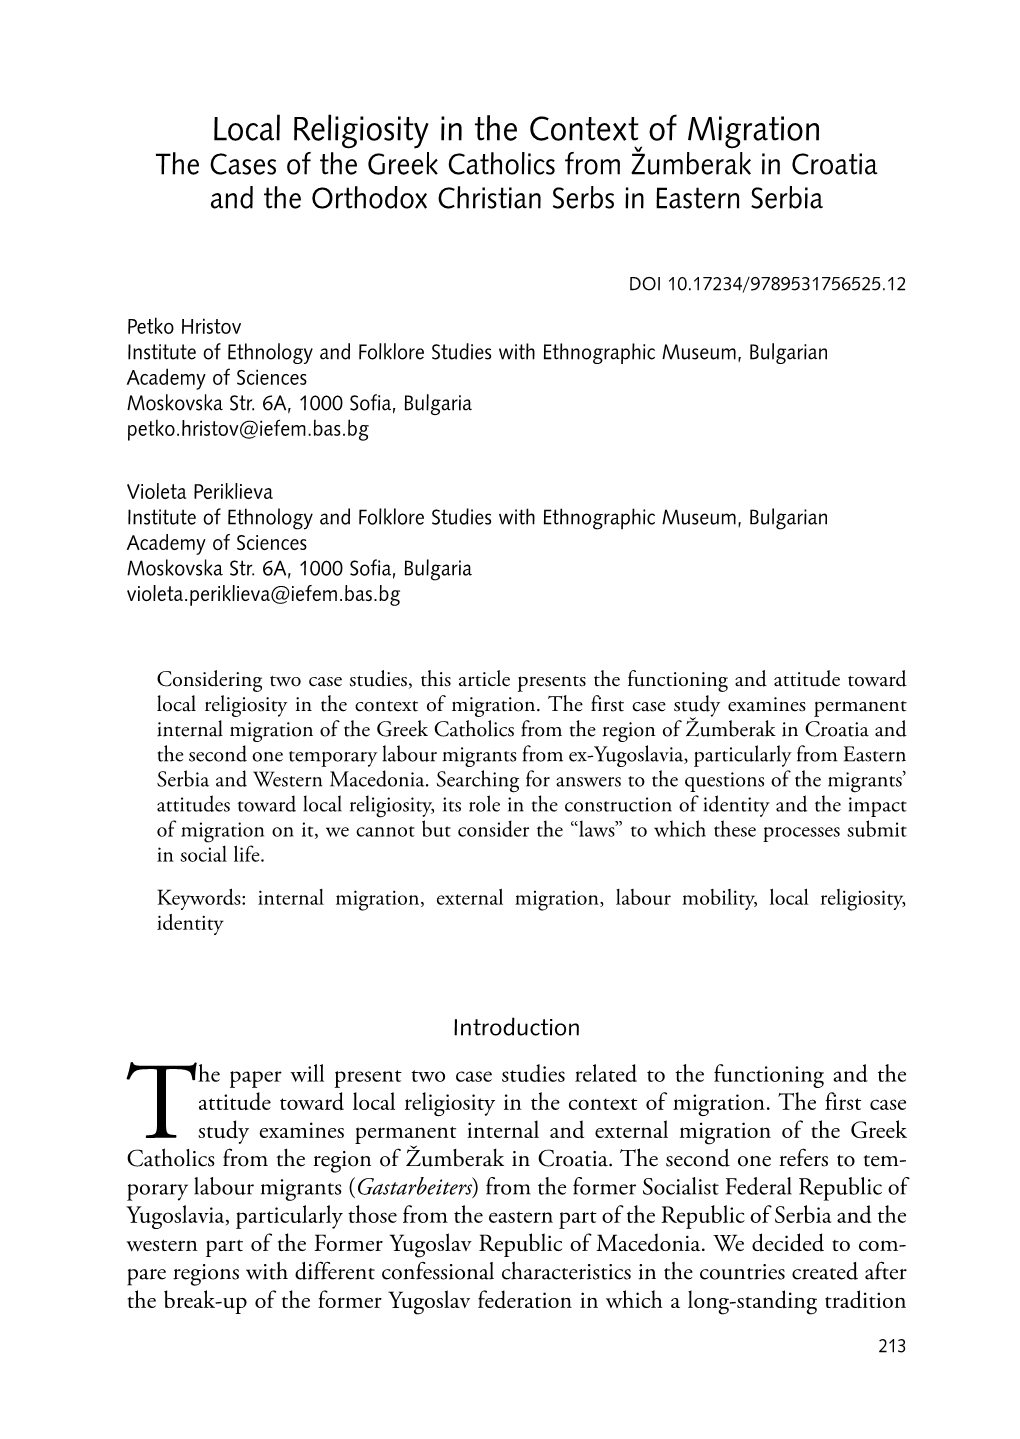 Local Religiosity in the Context of Migration the Cases of the Greek Catholics from Žumberak in Croatia and the Orthodox Christian Serbs in Eastern Serbia